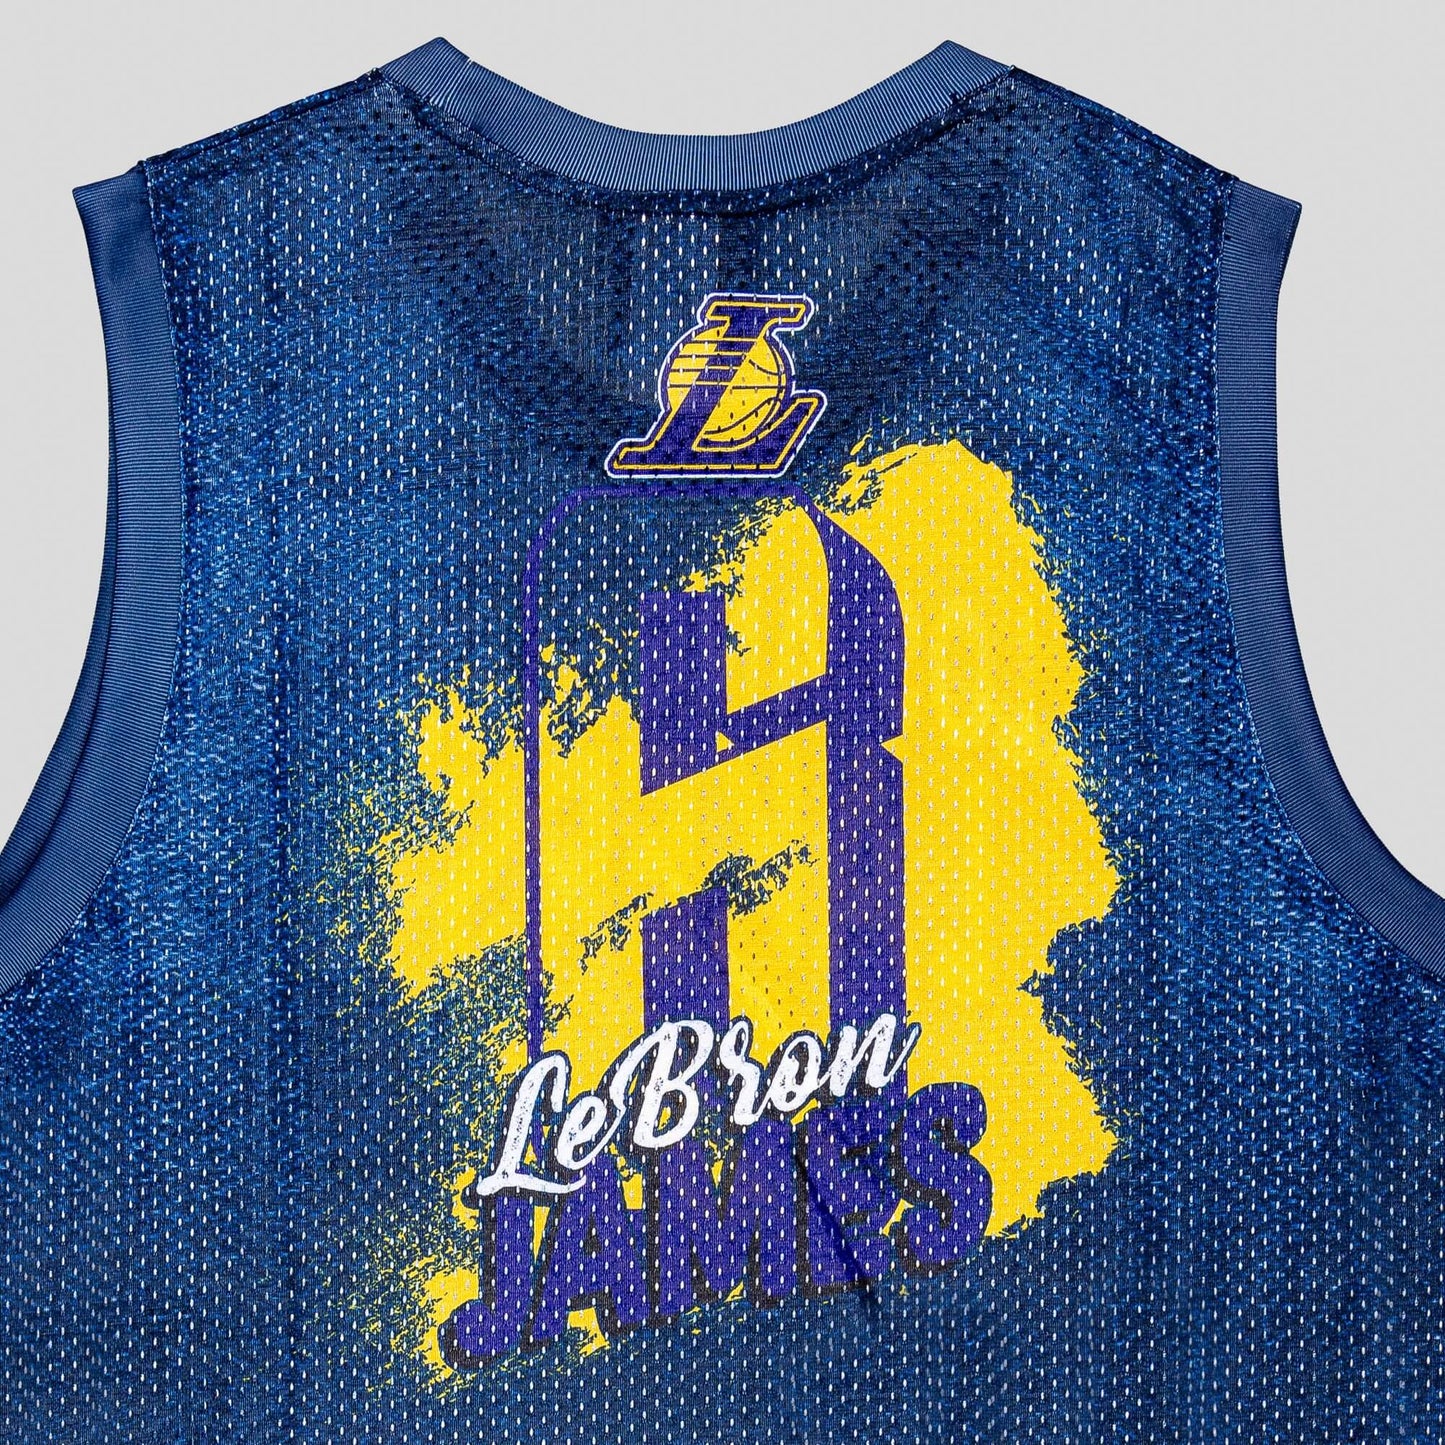 Outer Stuff Heating Up' Top - Player Specific Los Angeles Lakers Lebron James Indigo